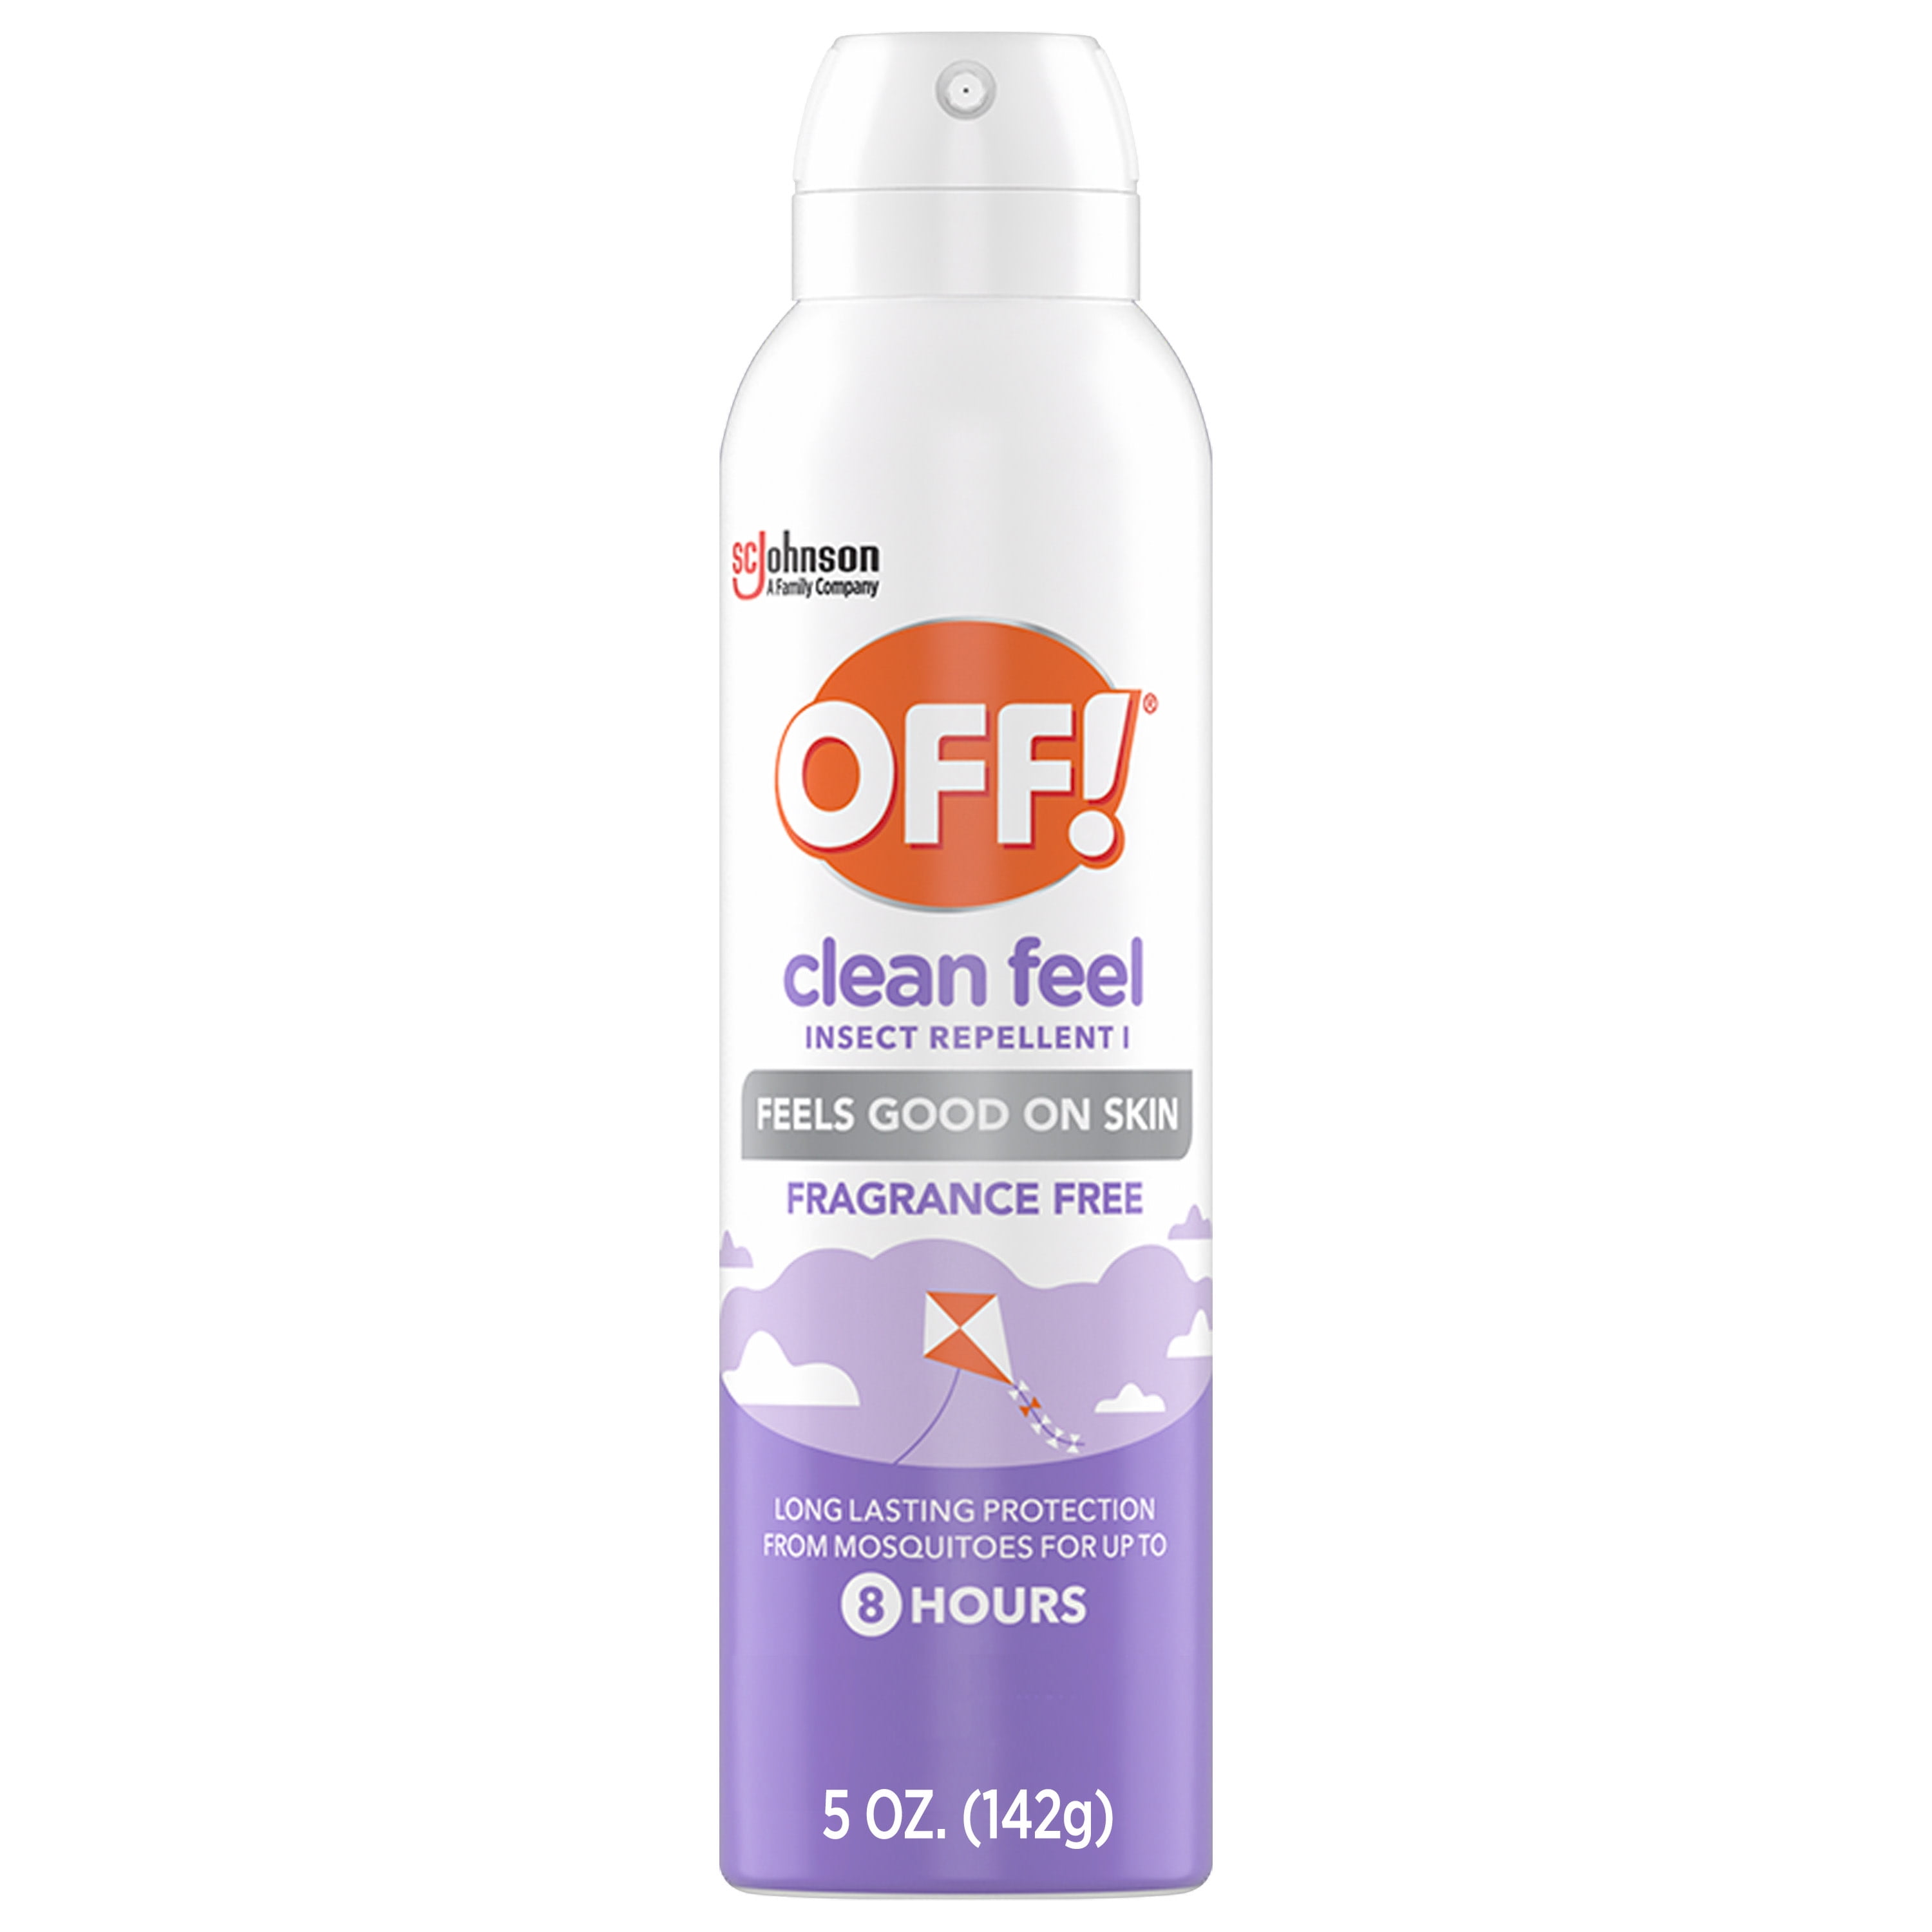 OFF! Clean Feel Picaridin Mosquito Repellent Aerosol, Long-lasting OFF! Bug Spray Protection for Everyday Use, 5 Oz/142 g